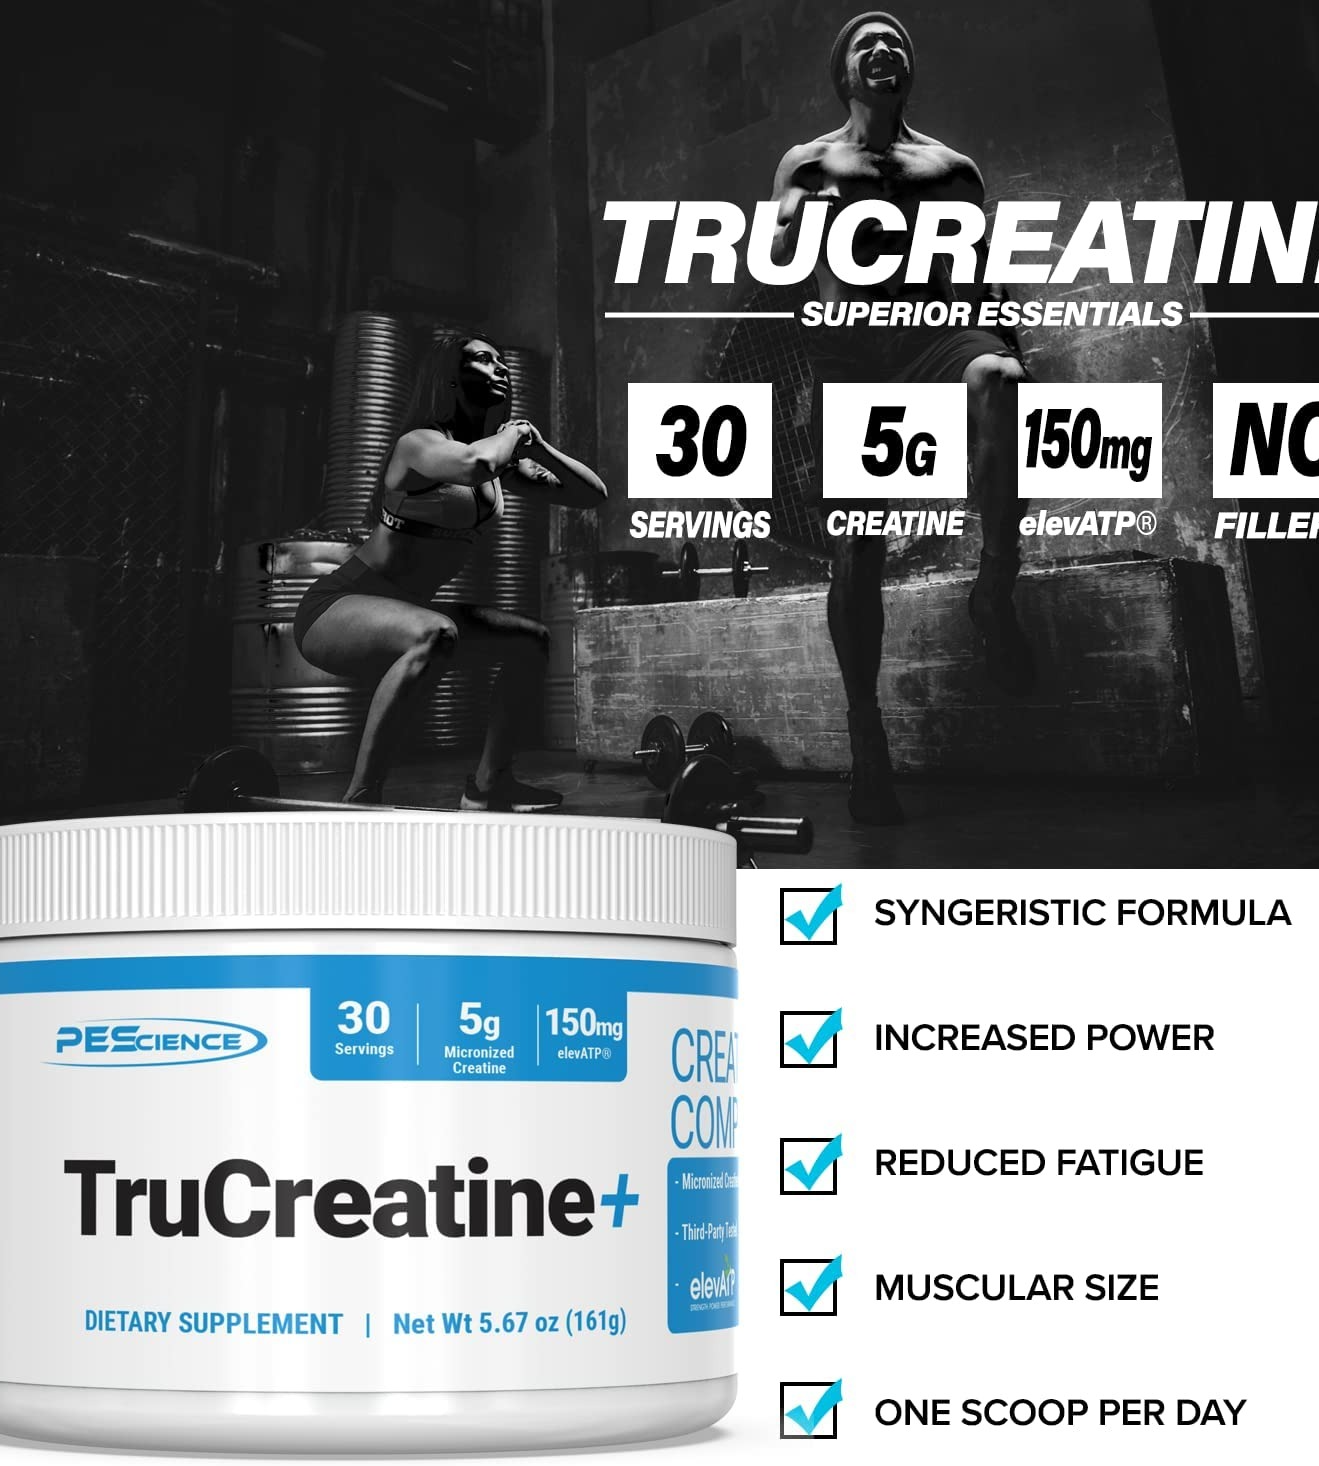 Achieve Your Fitness Goals with Creatine Gummies - A Delicious and Effective Solution